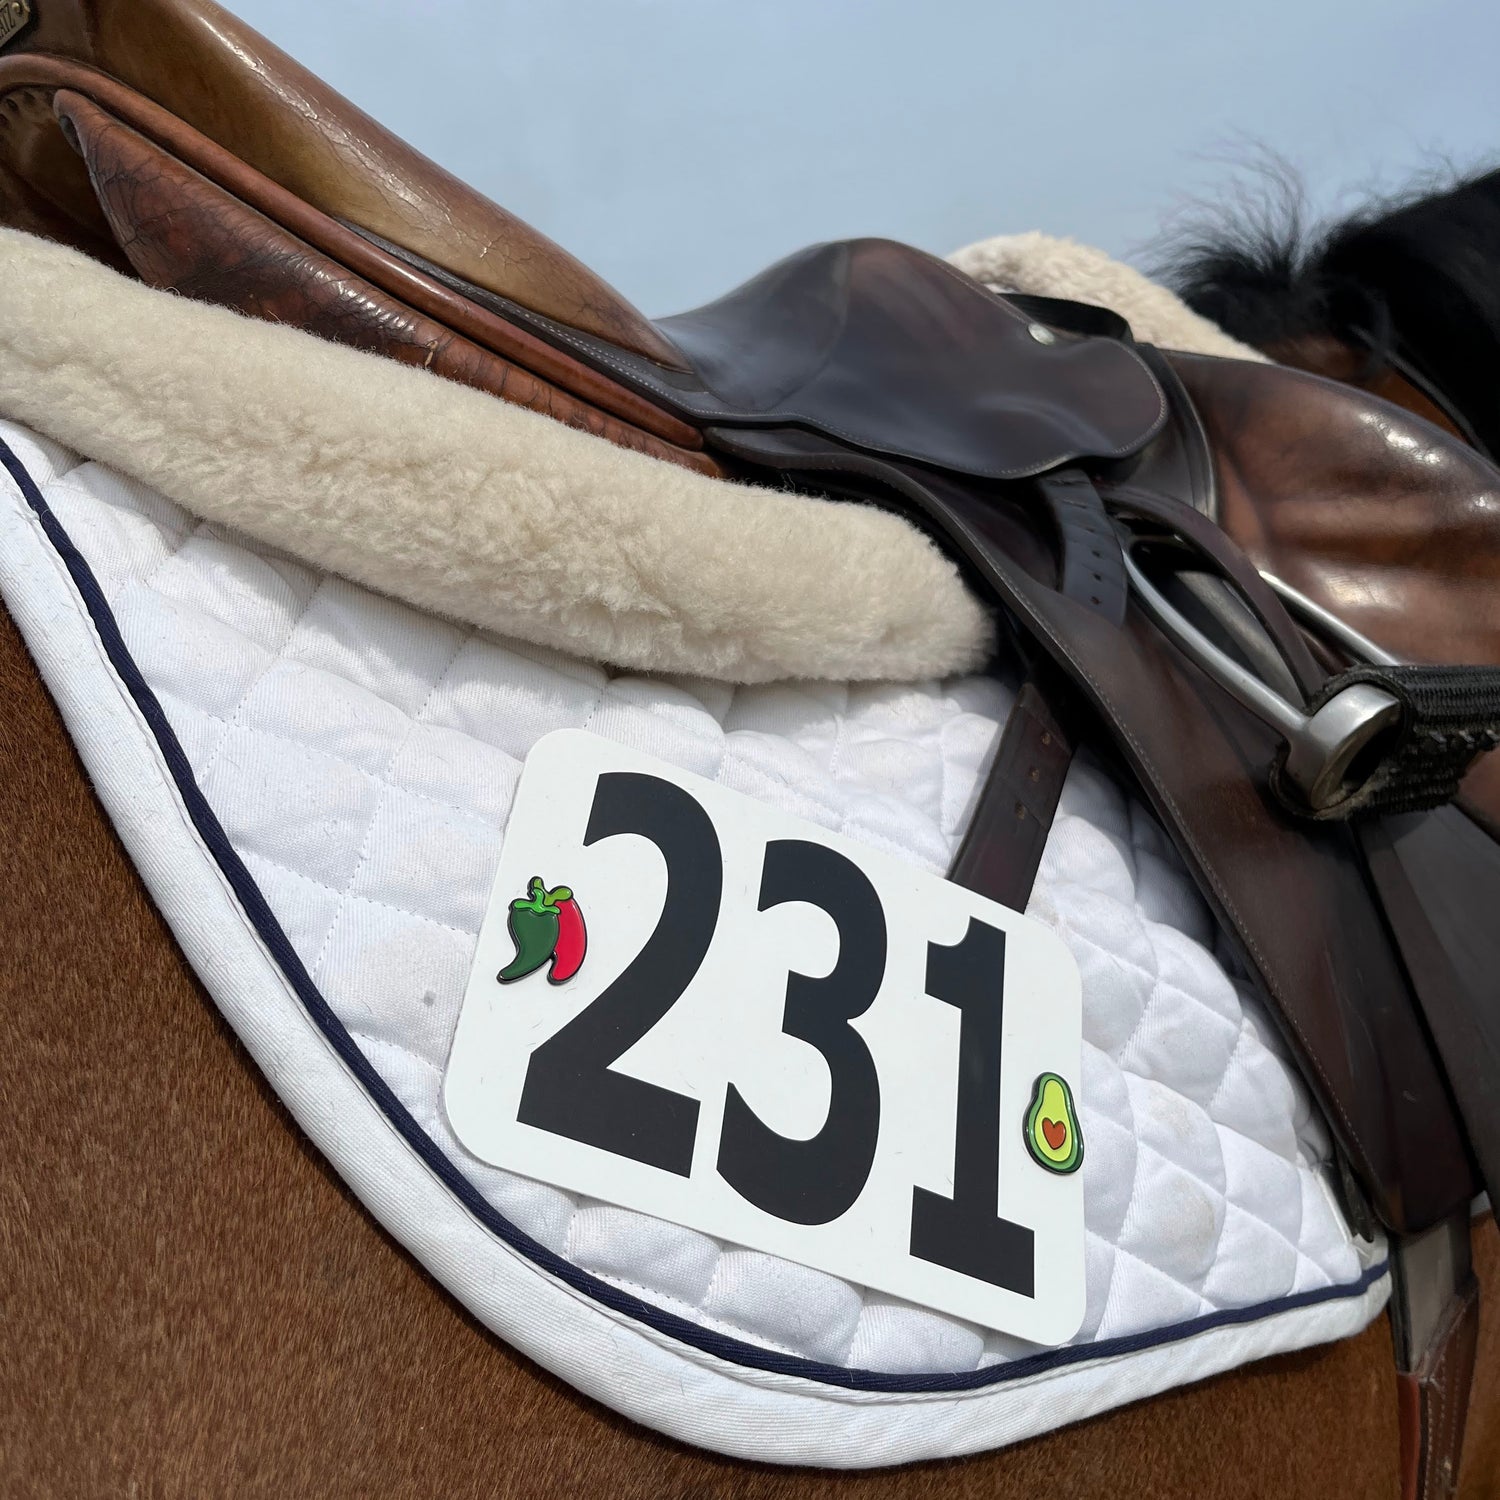 Pinsnickety Chili Peppers and Avocado horse show number pads mixed together on a saddle pad